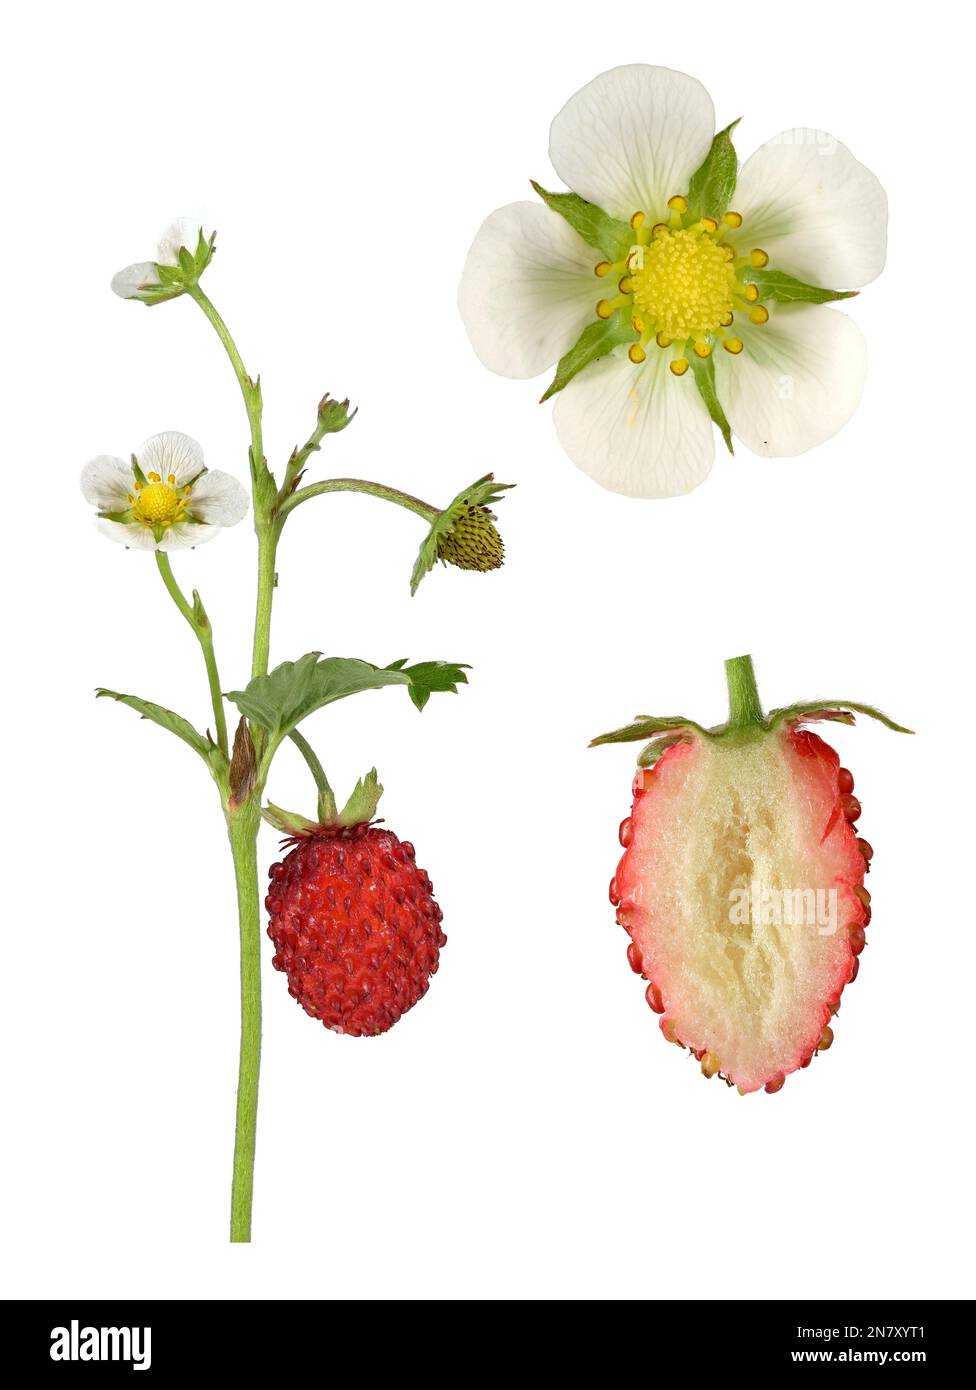 Woodland strawberry (Fragaria vesca), plant, flower, fruit cut open, picture panel, Germany Stock Photo